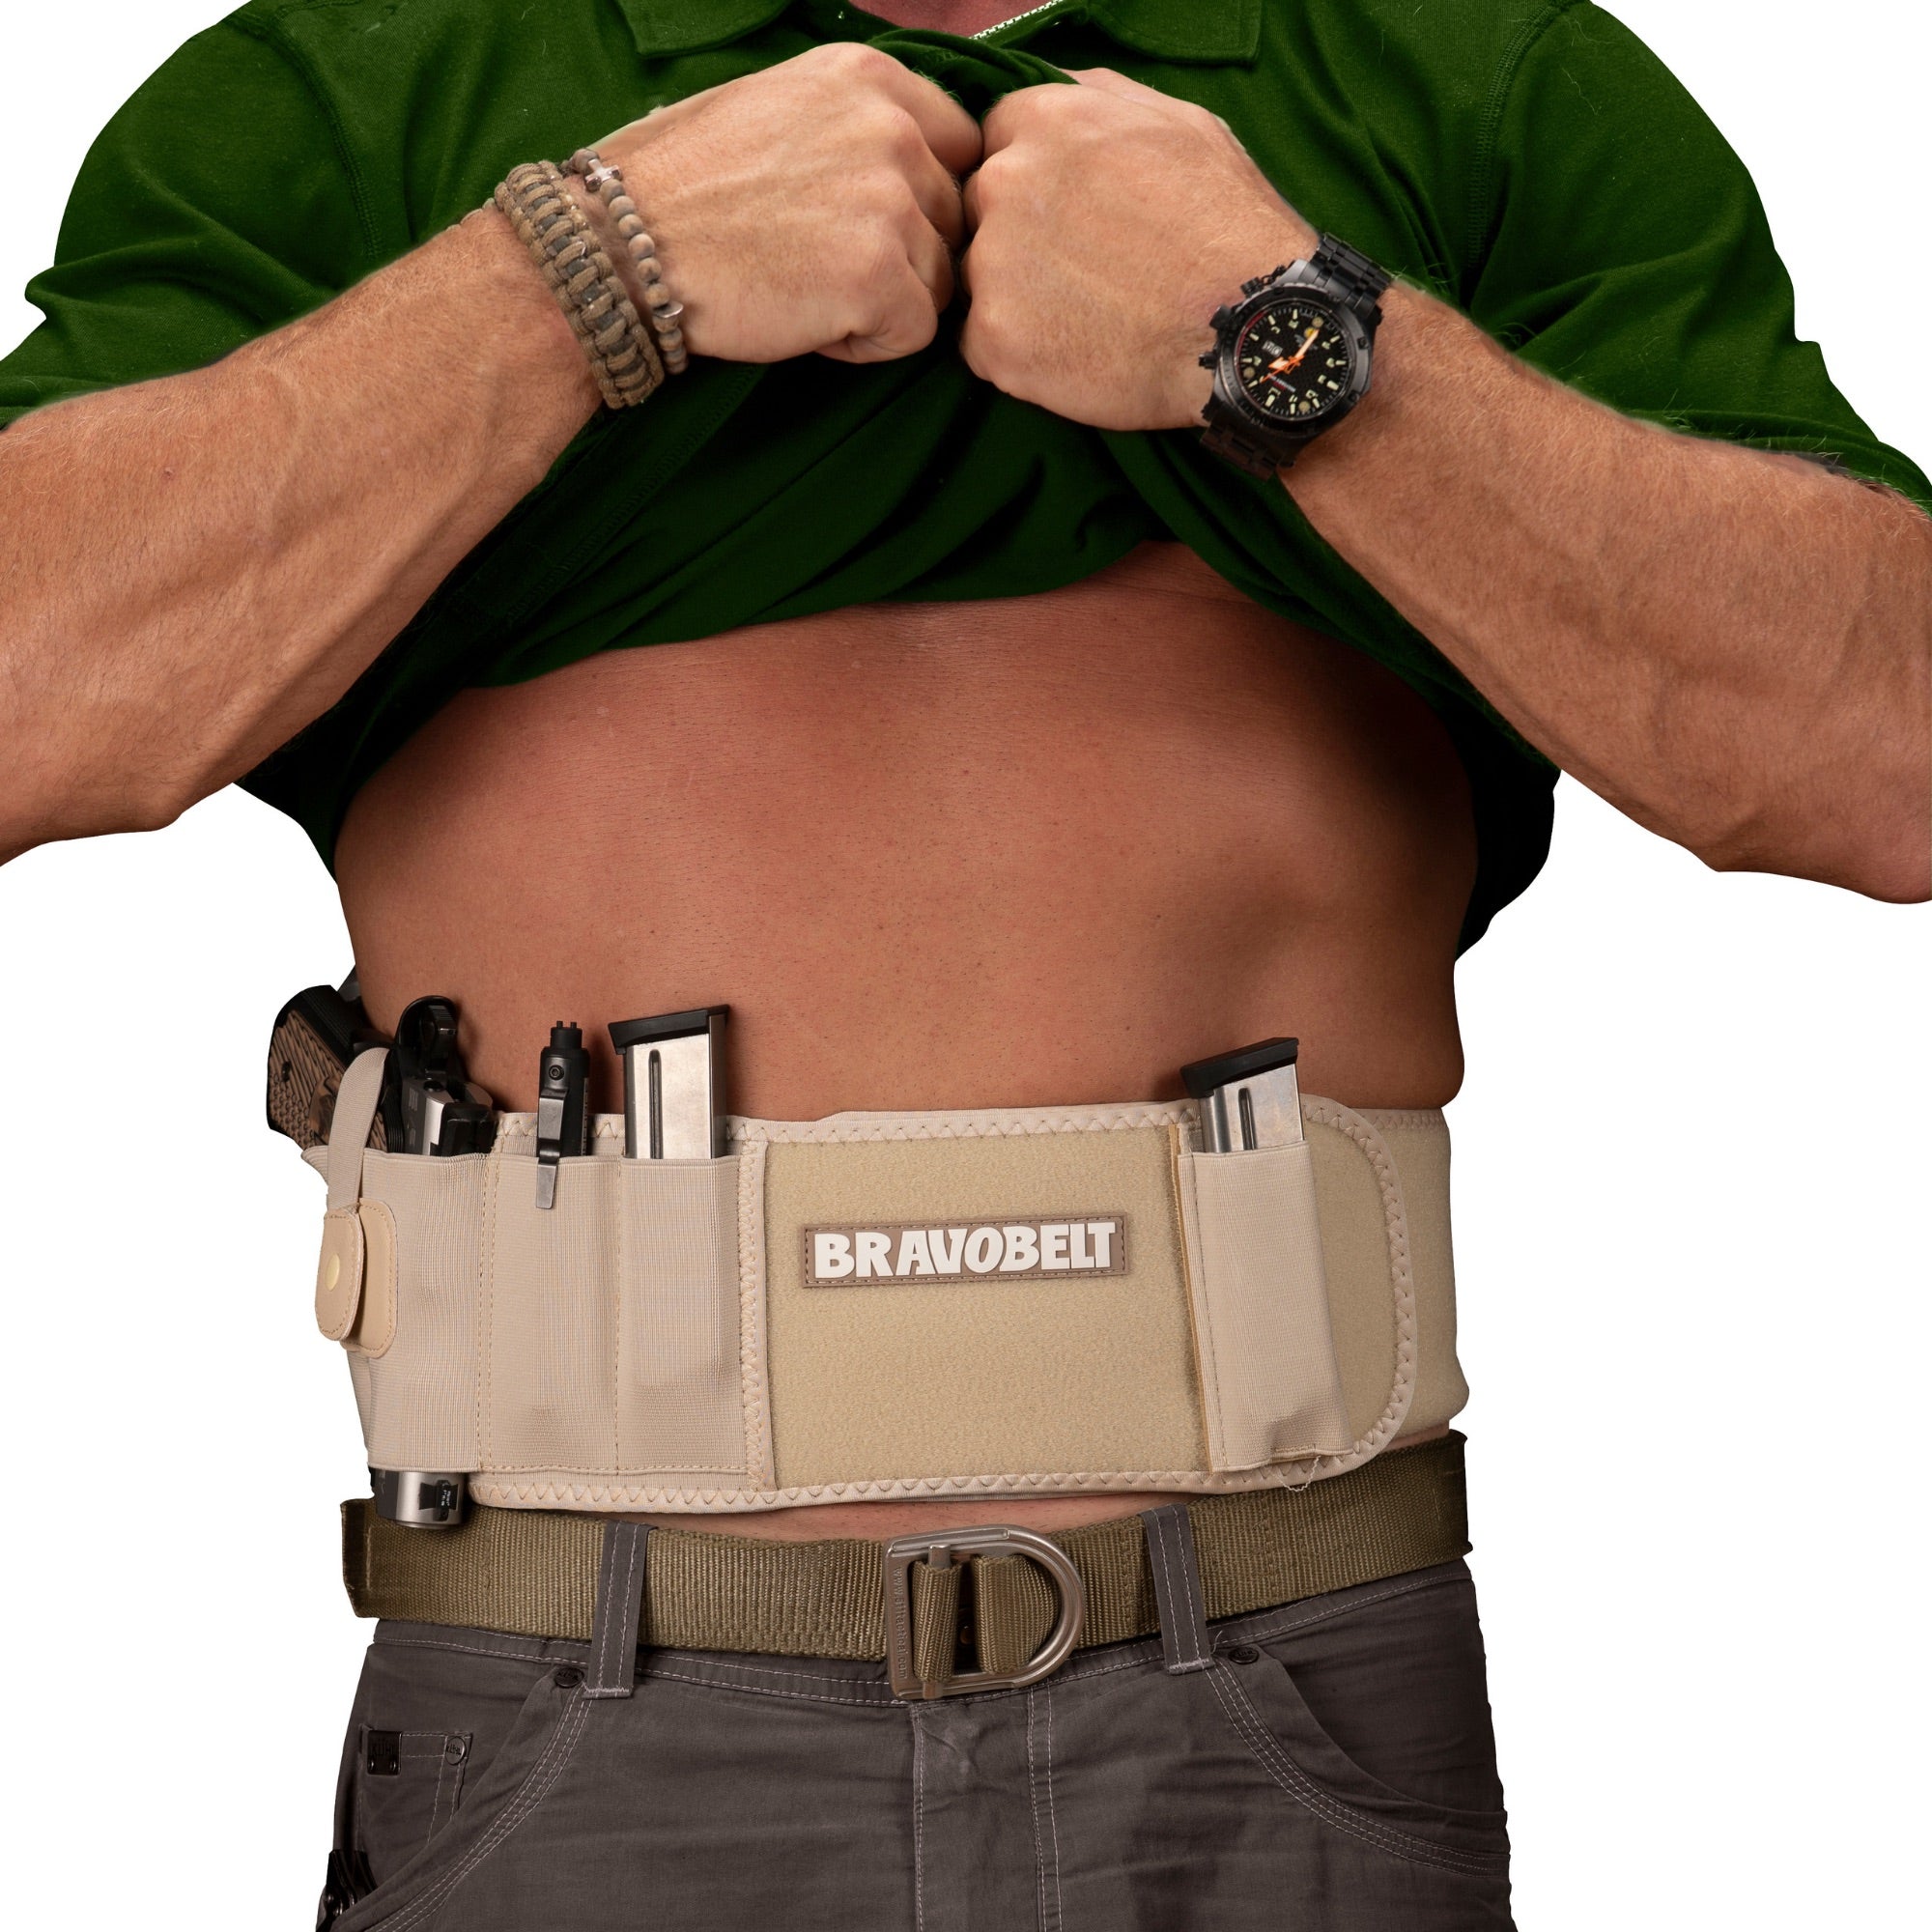  Crienten Belly Band Holster for Concealed Carry